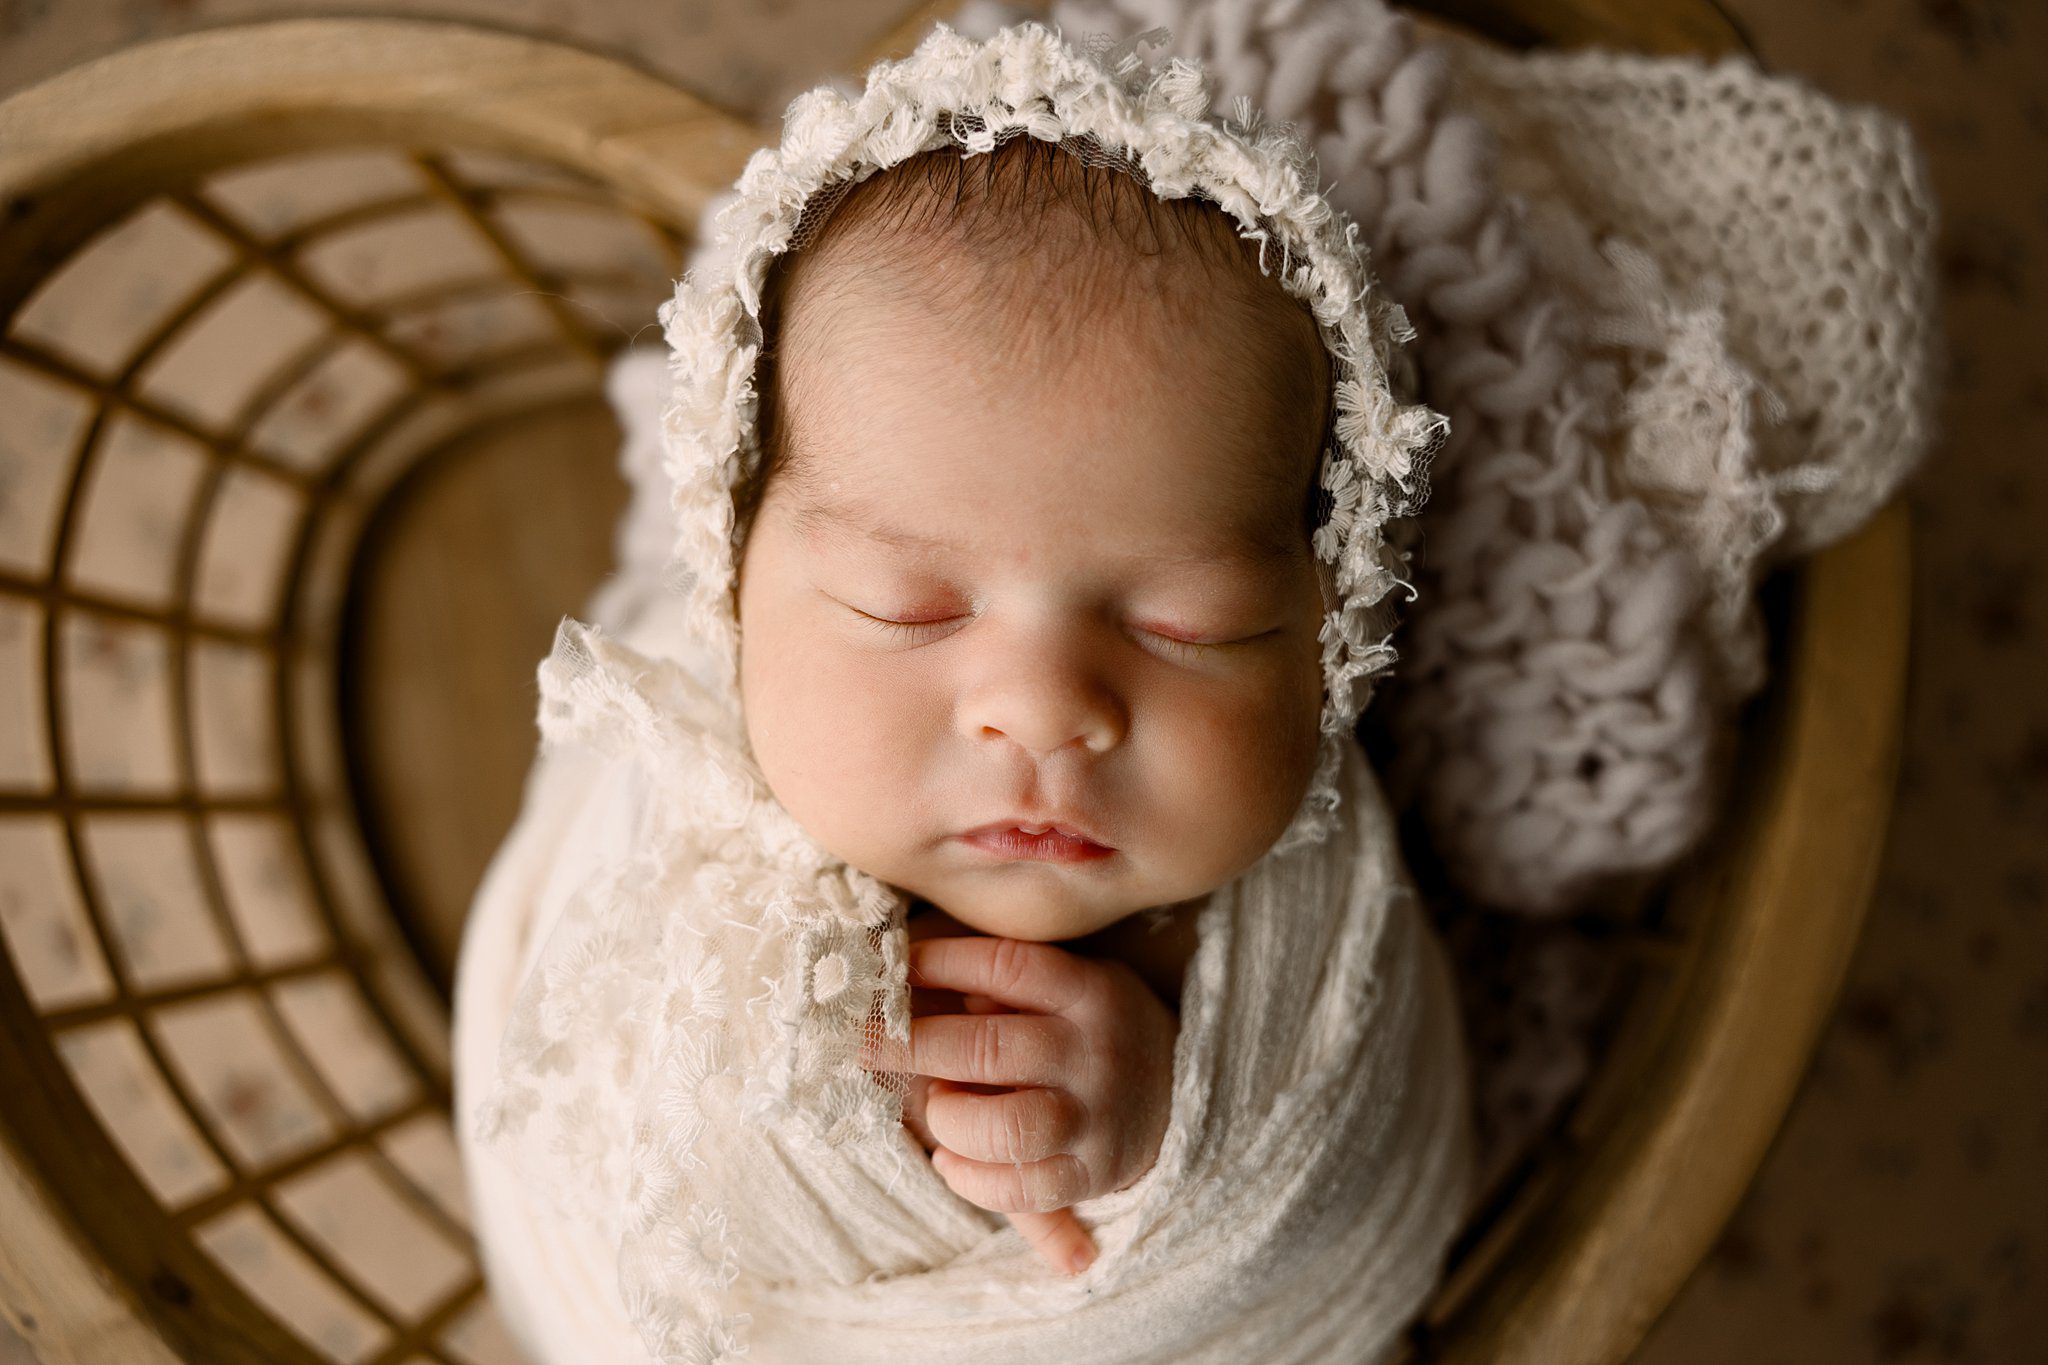 A newborn baby in a white swaddle sleeps with a matching lace bonnet in a wooden basket